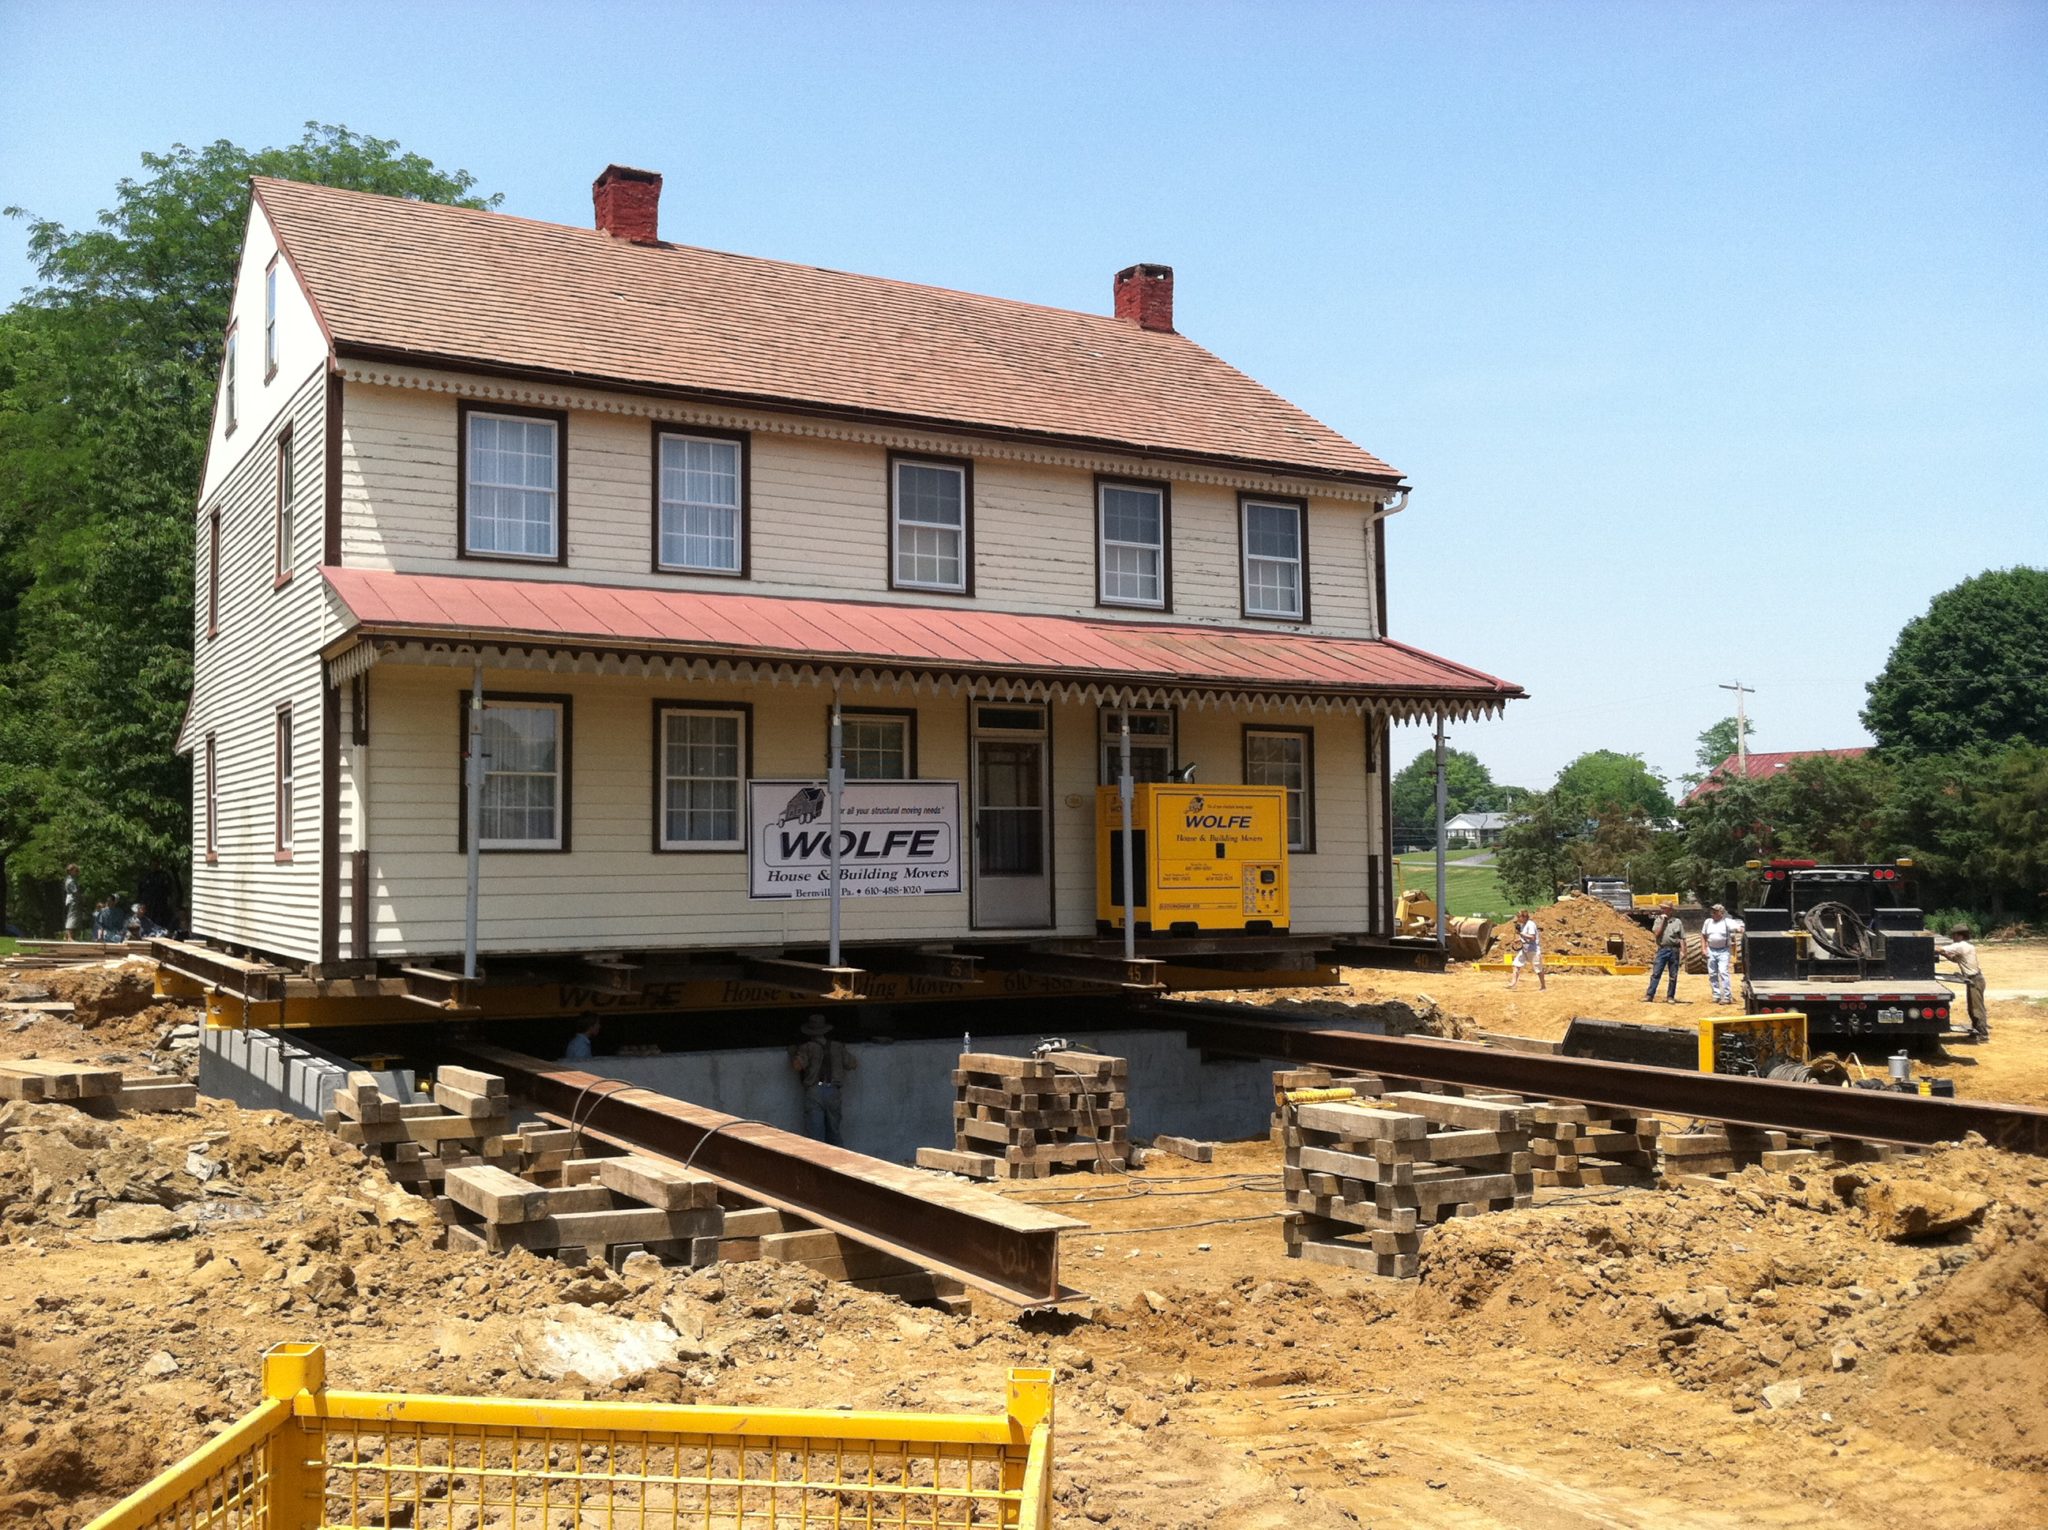 Two hundred year old two story schaefferstown home moving onto new foundation.